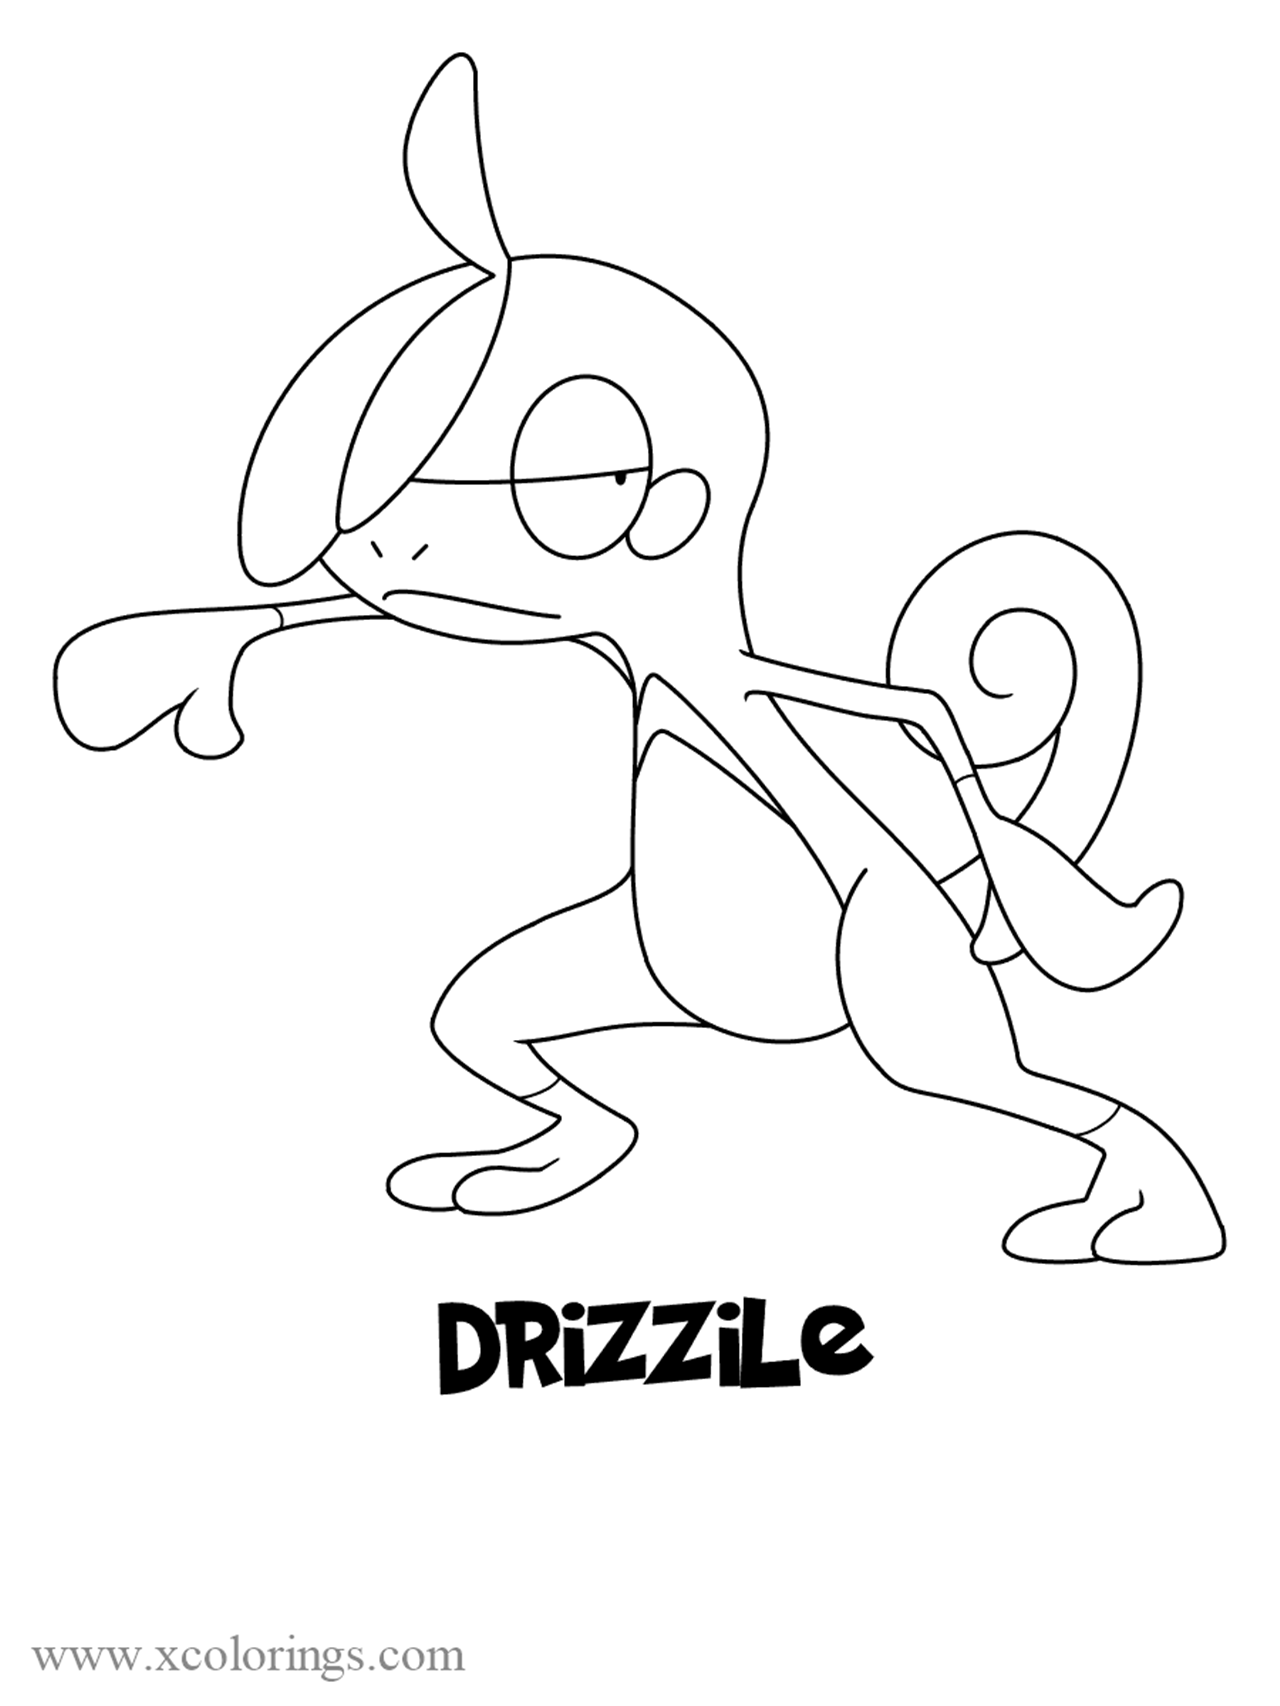 Free Pokemon sword and shield Drizzile Coloring Pages printable